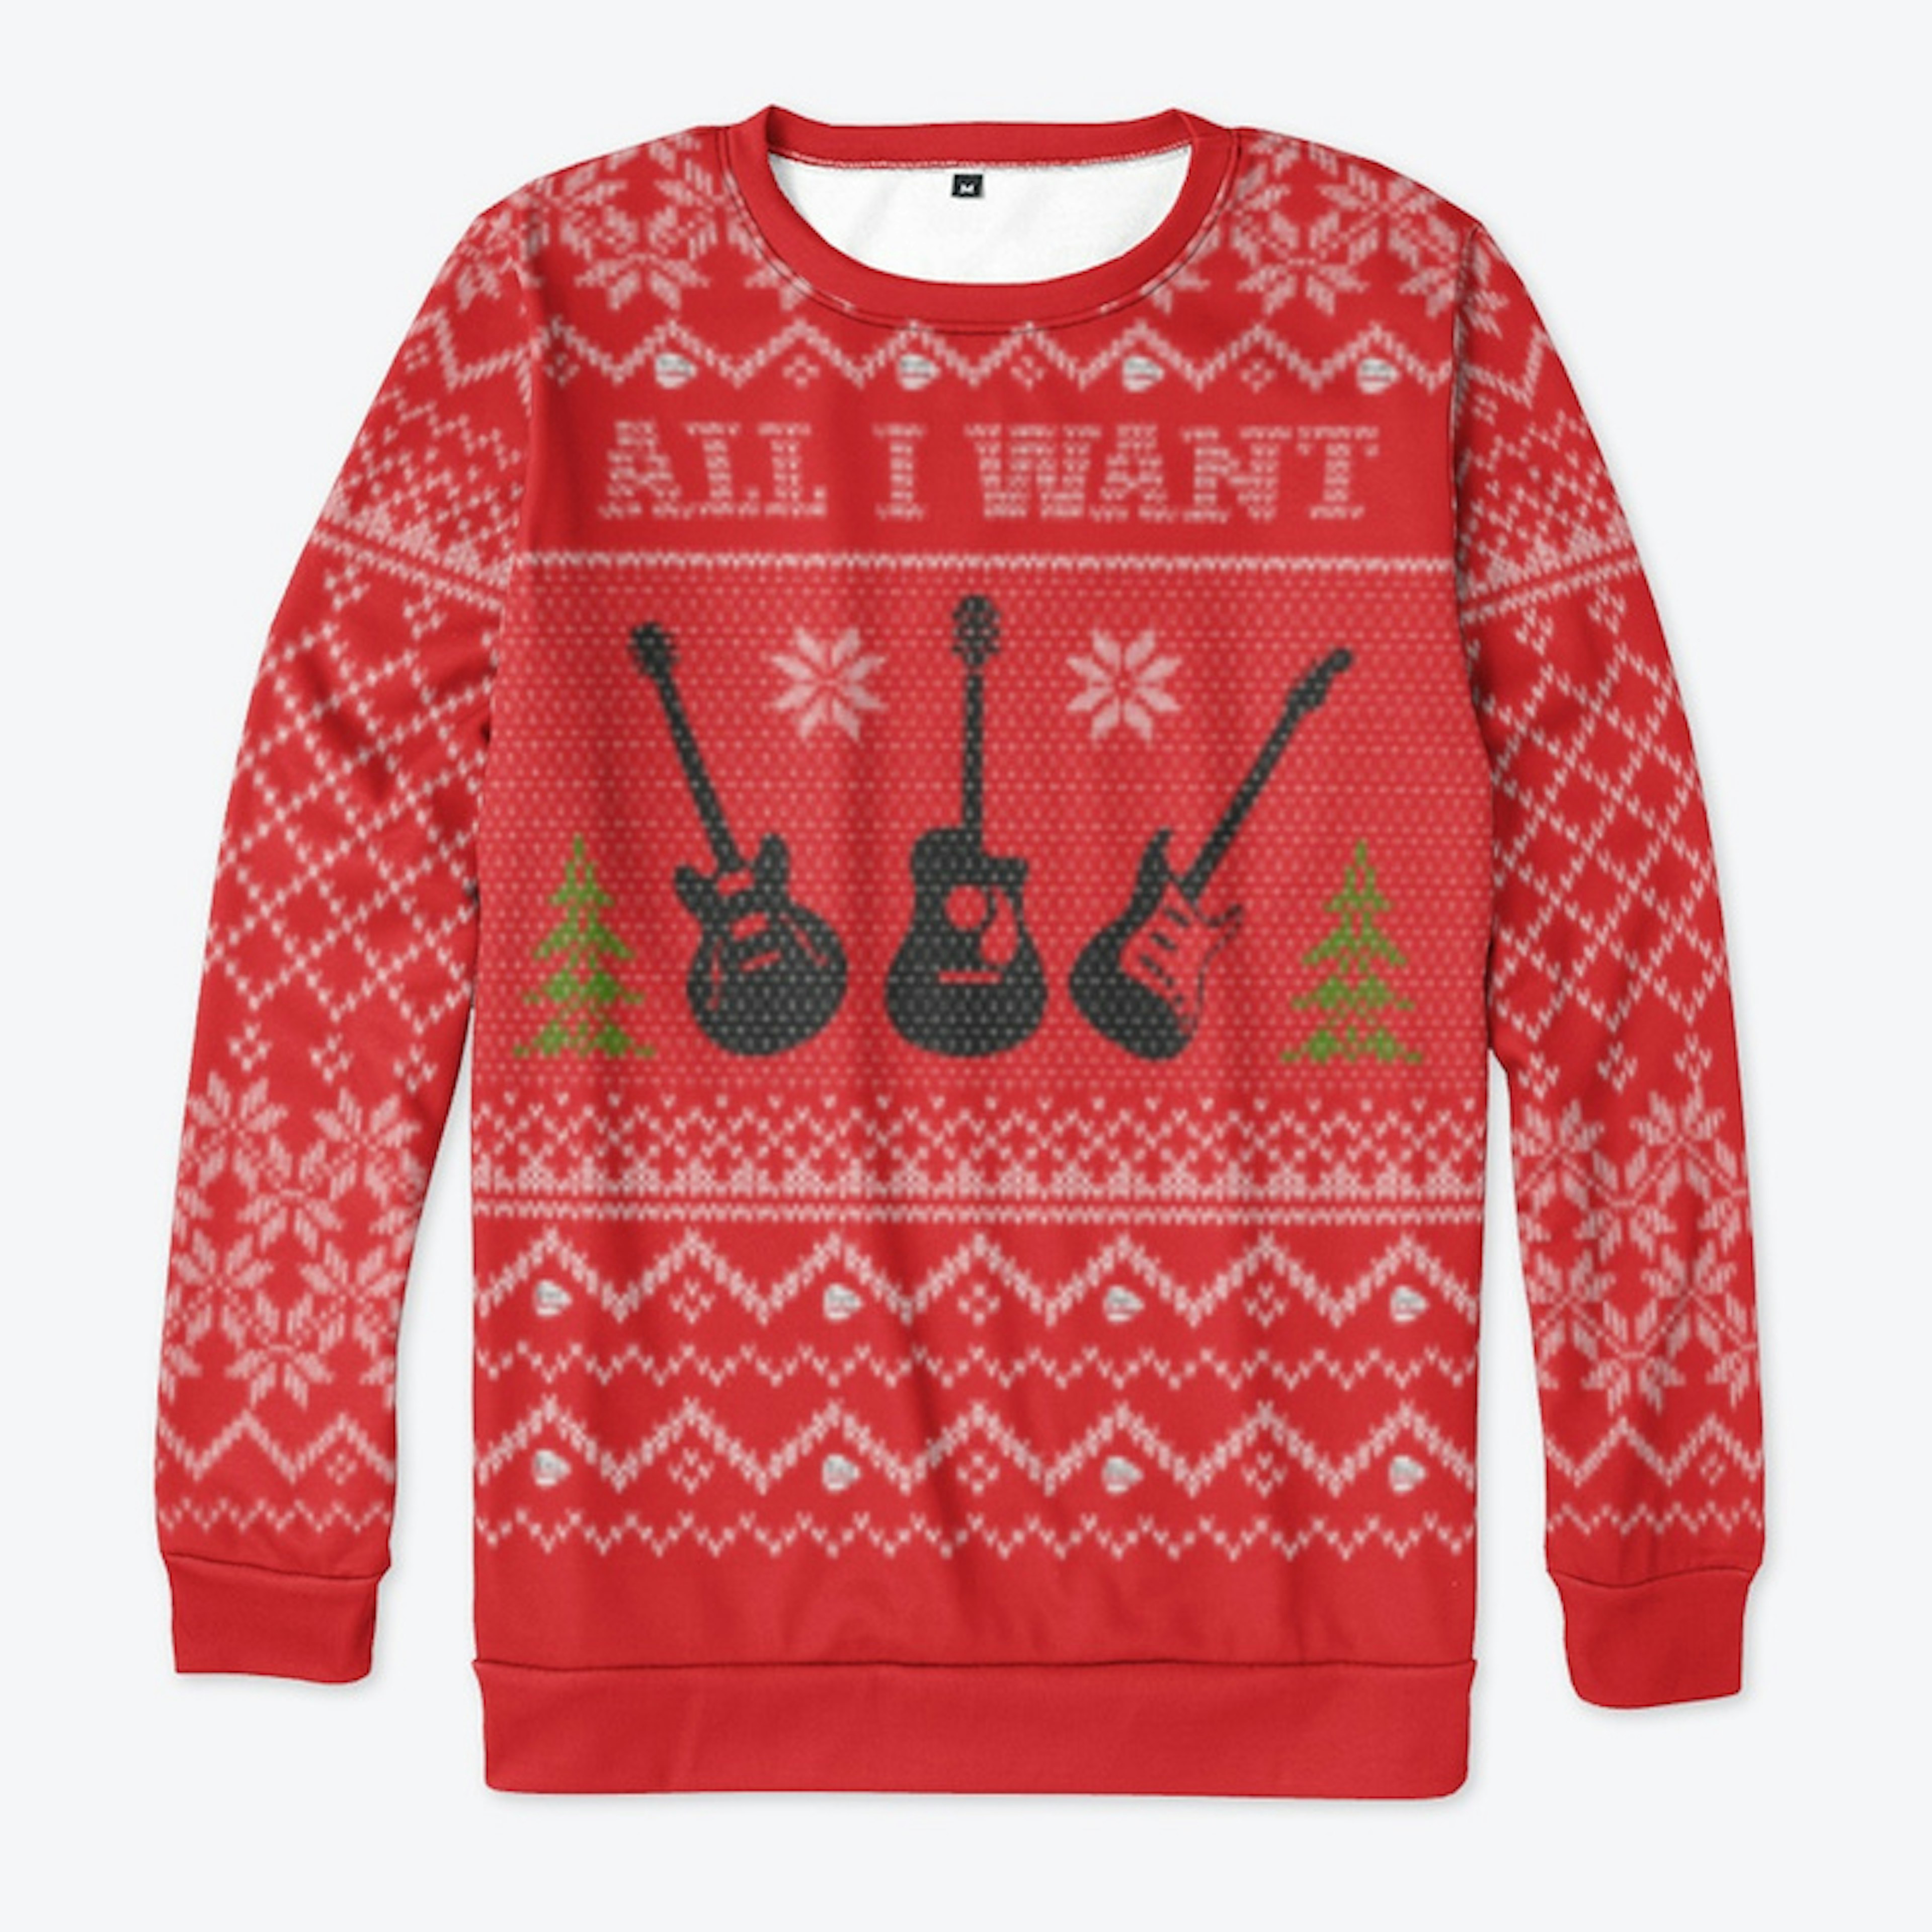 'All I Want' Holiday Guitar Jumper 2